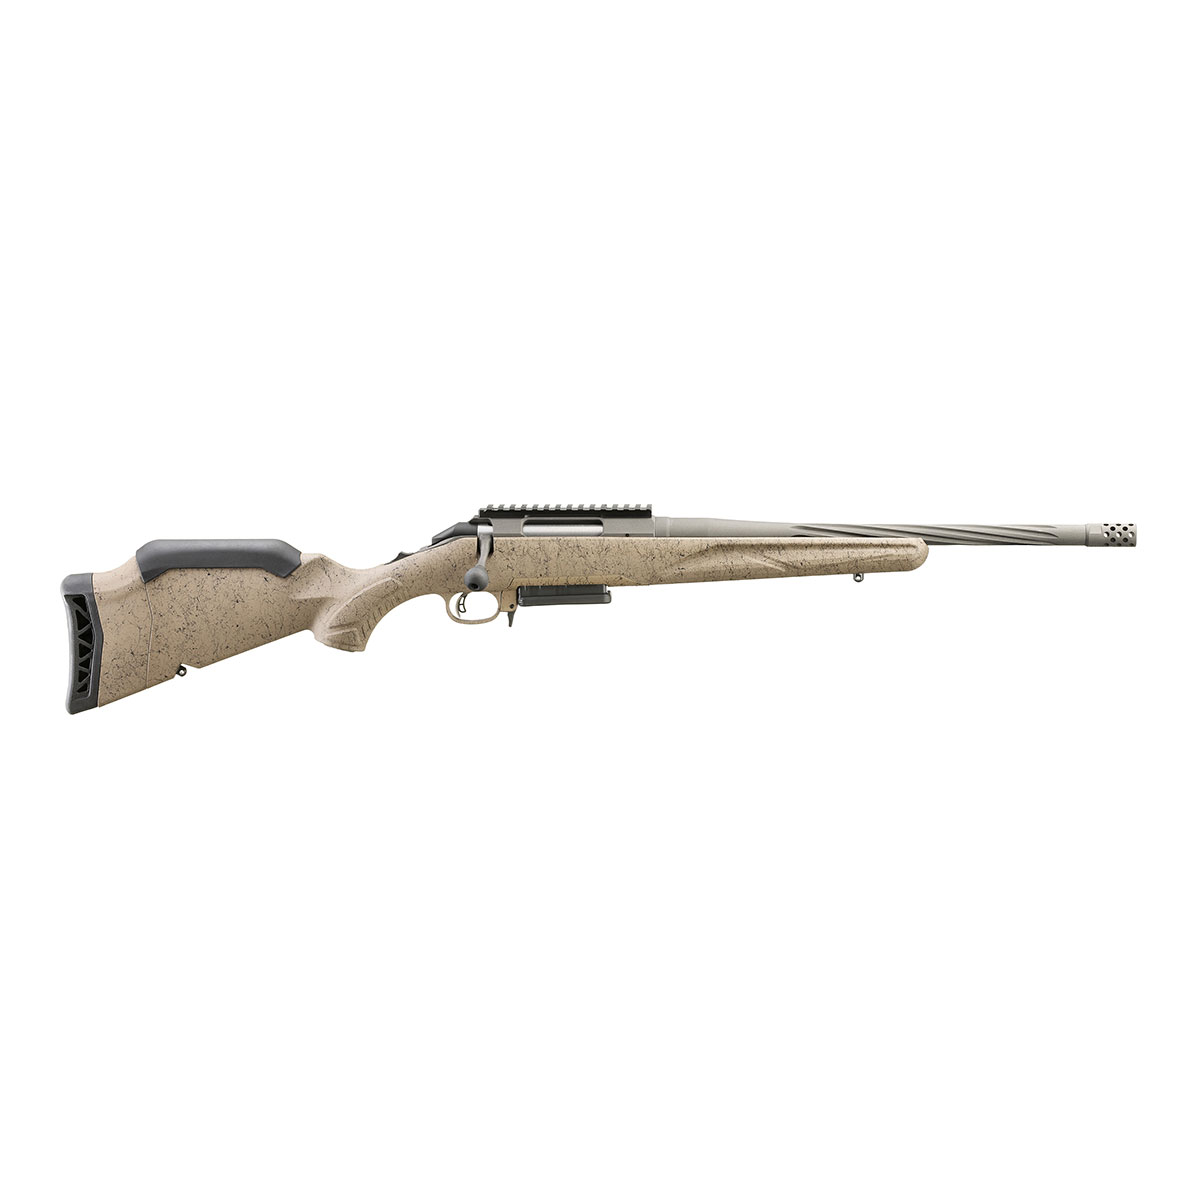 RUGER - AMERICAN GEN II RANCH 22 ARC BOLT ACTION RIFLE